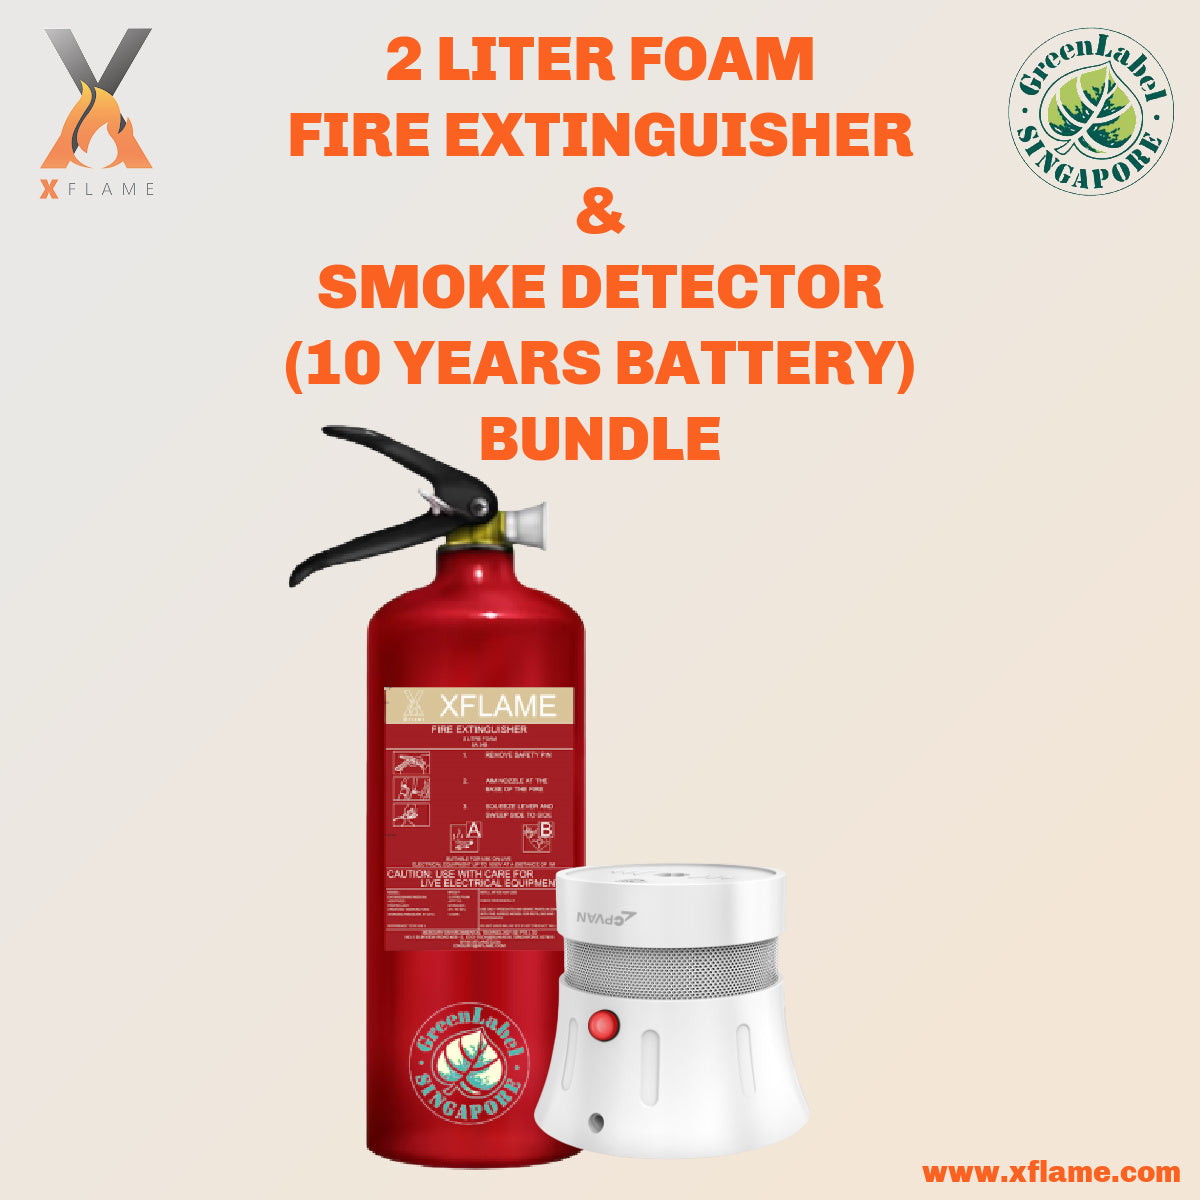 XFLAME 2L Foam Fire Extinguisher with Smoke Detector (10 Years Battery)